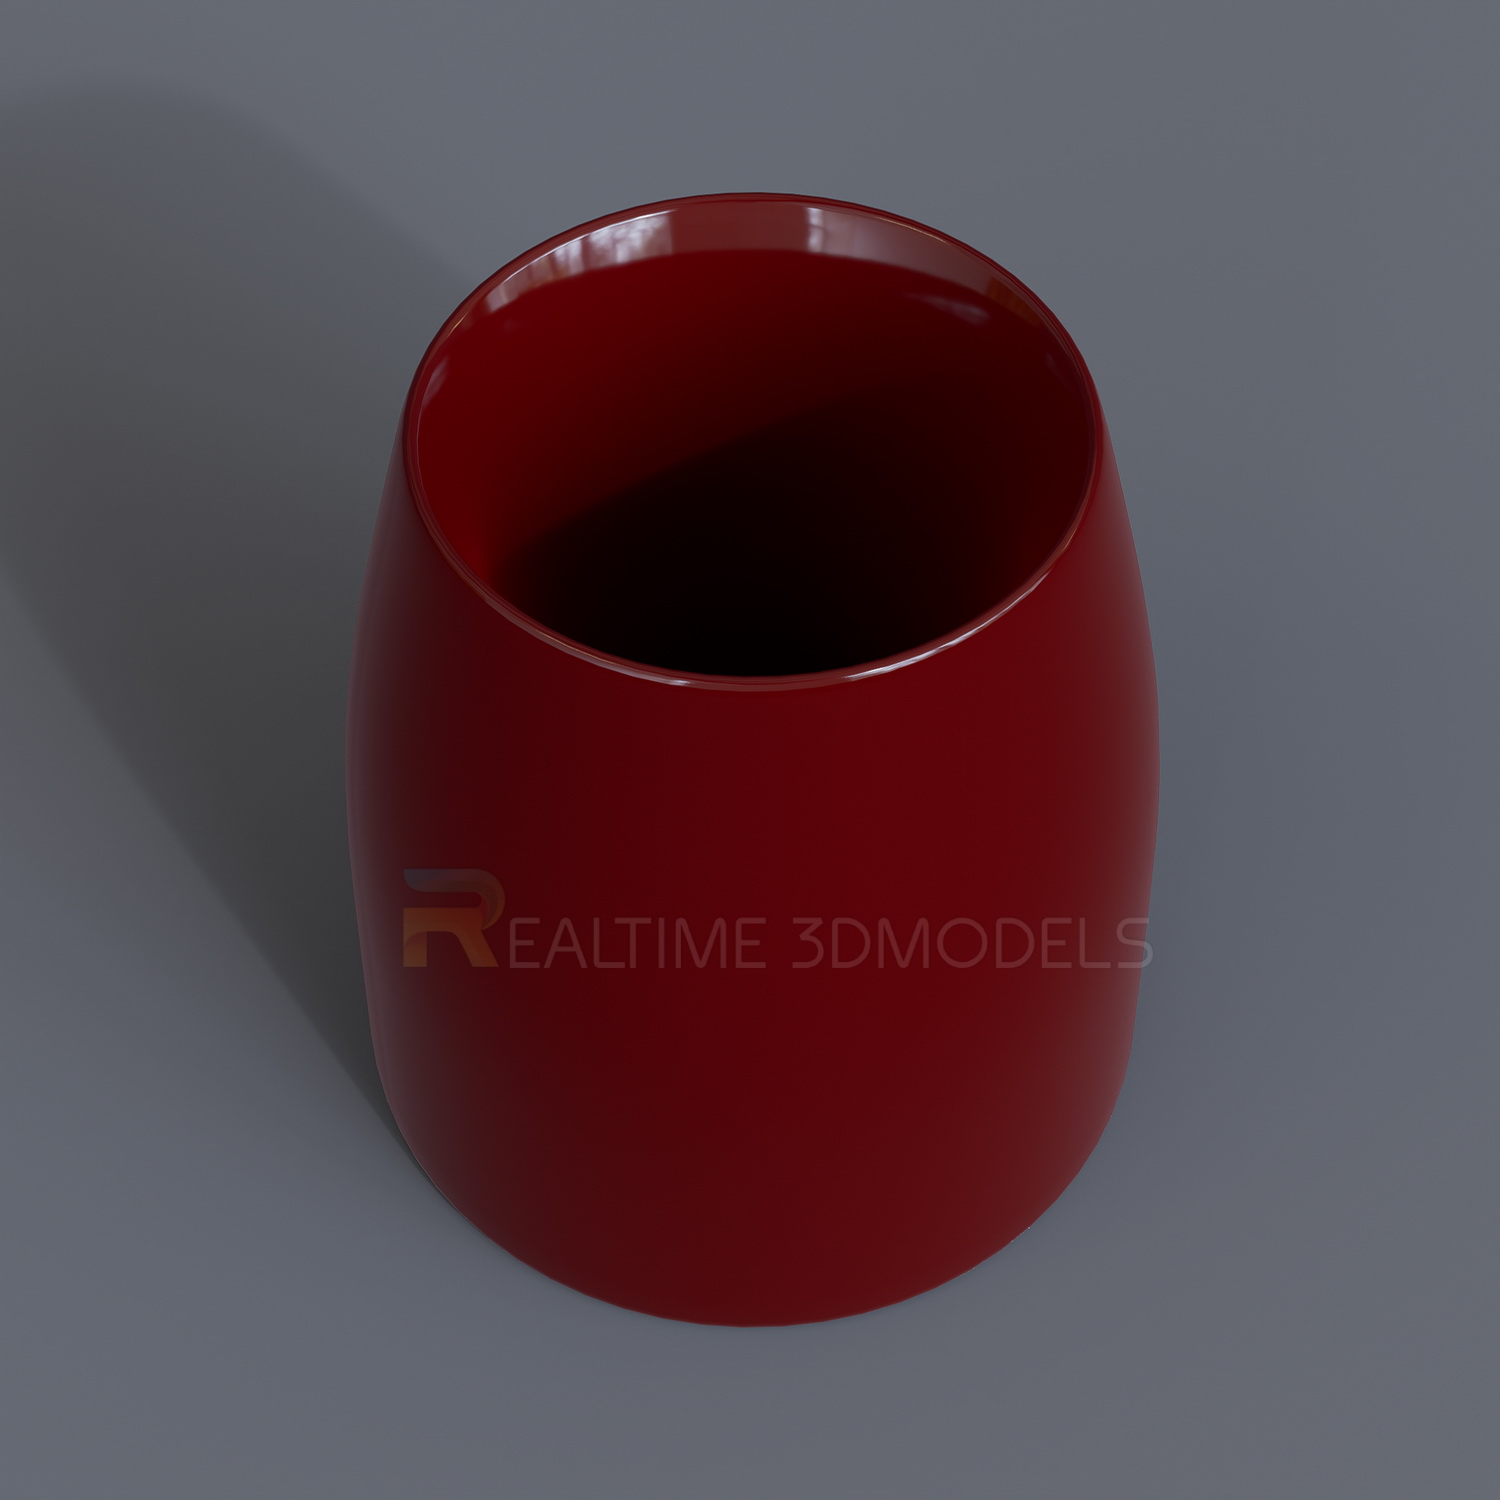 Realtime3d-00897